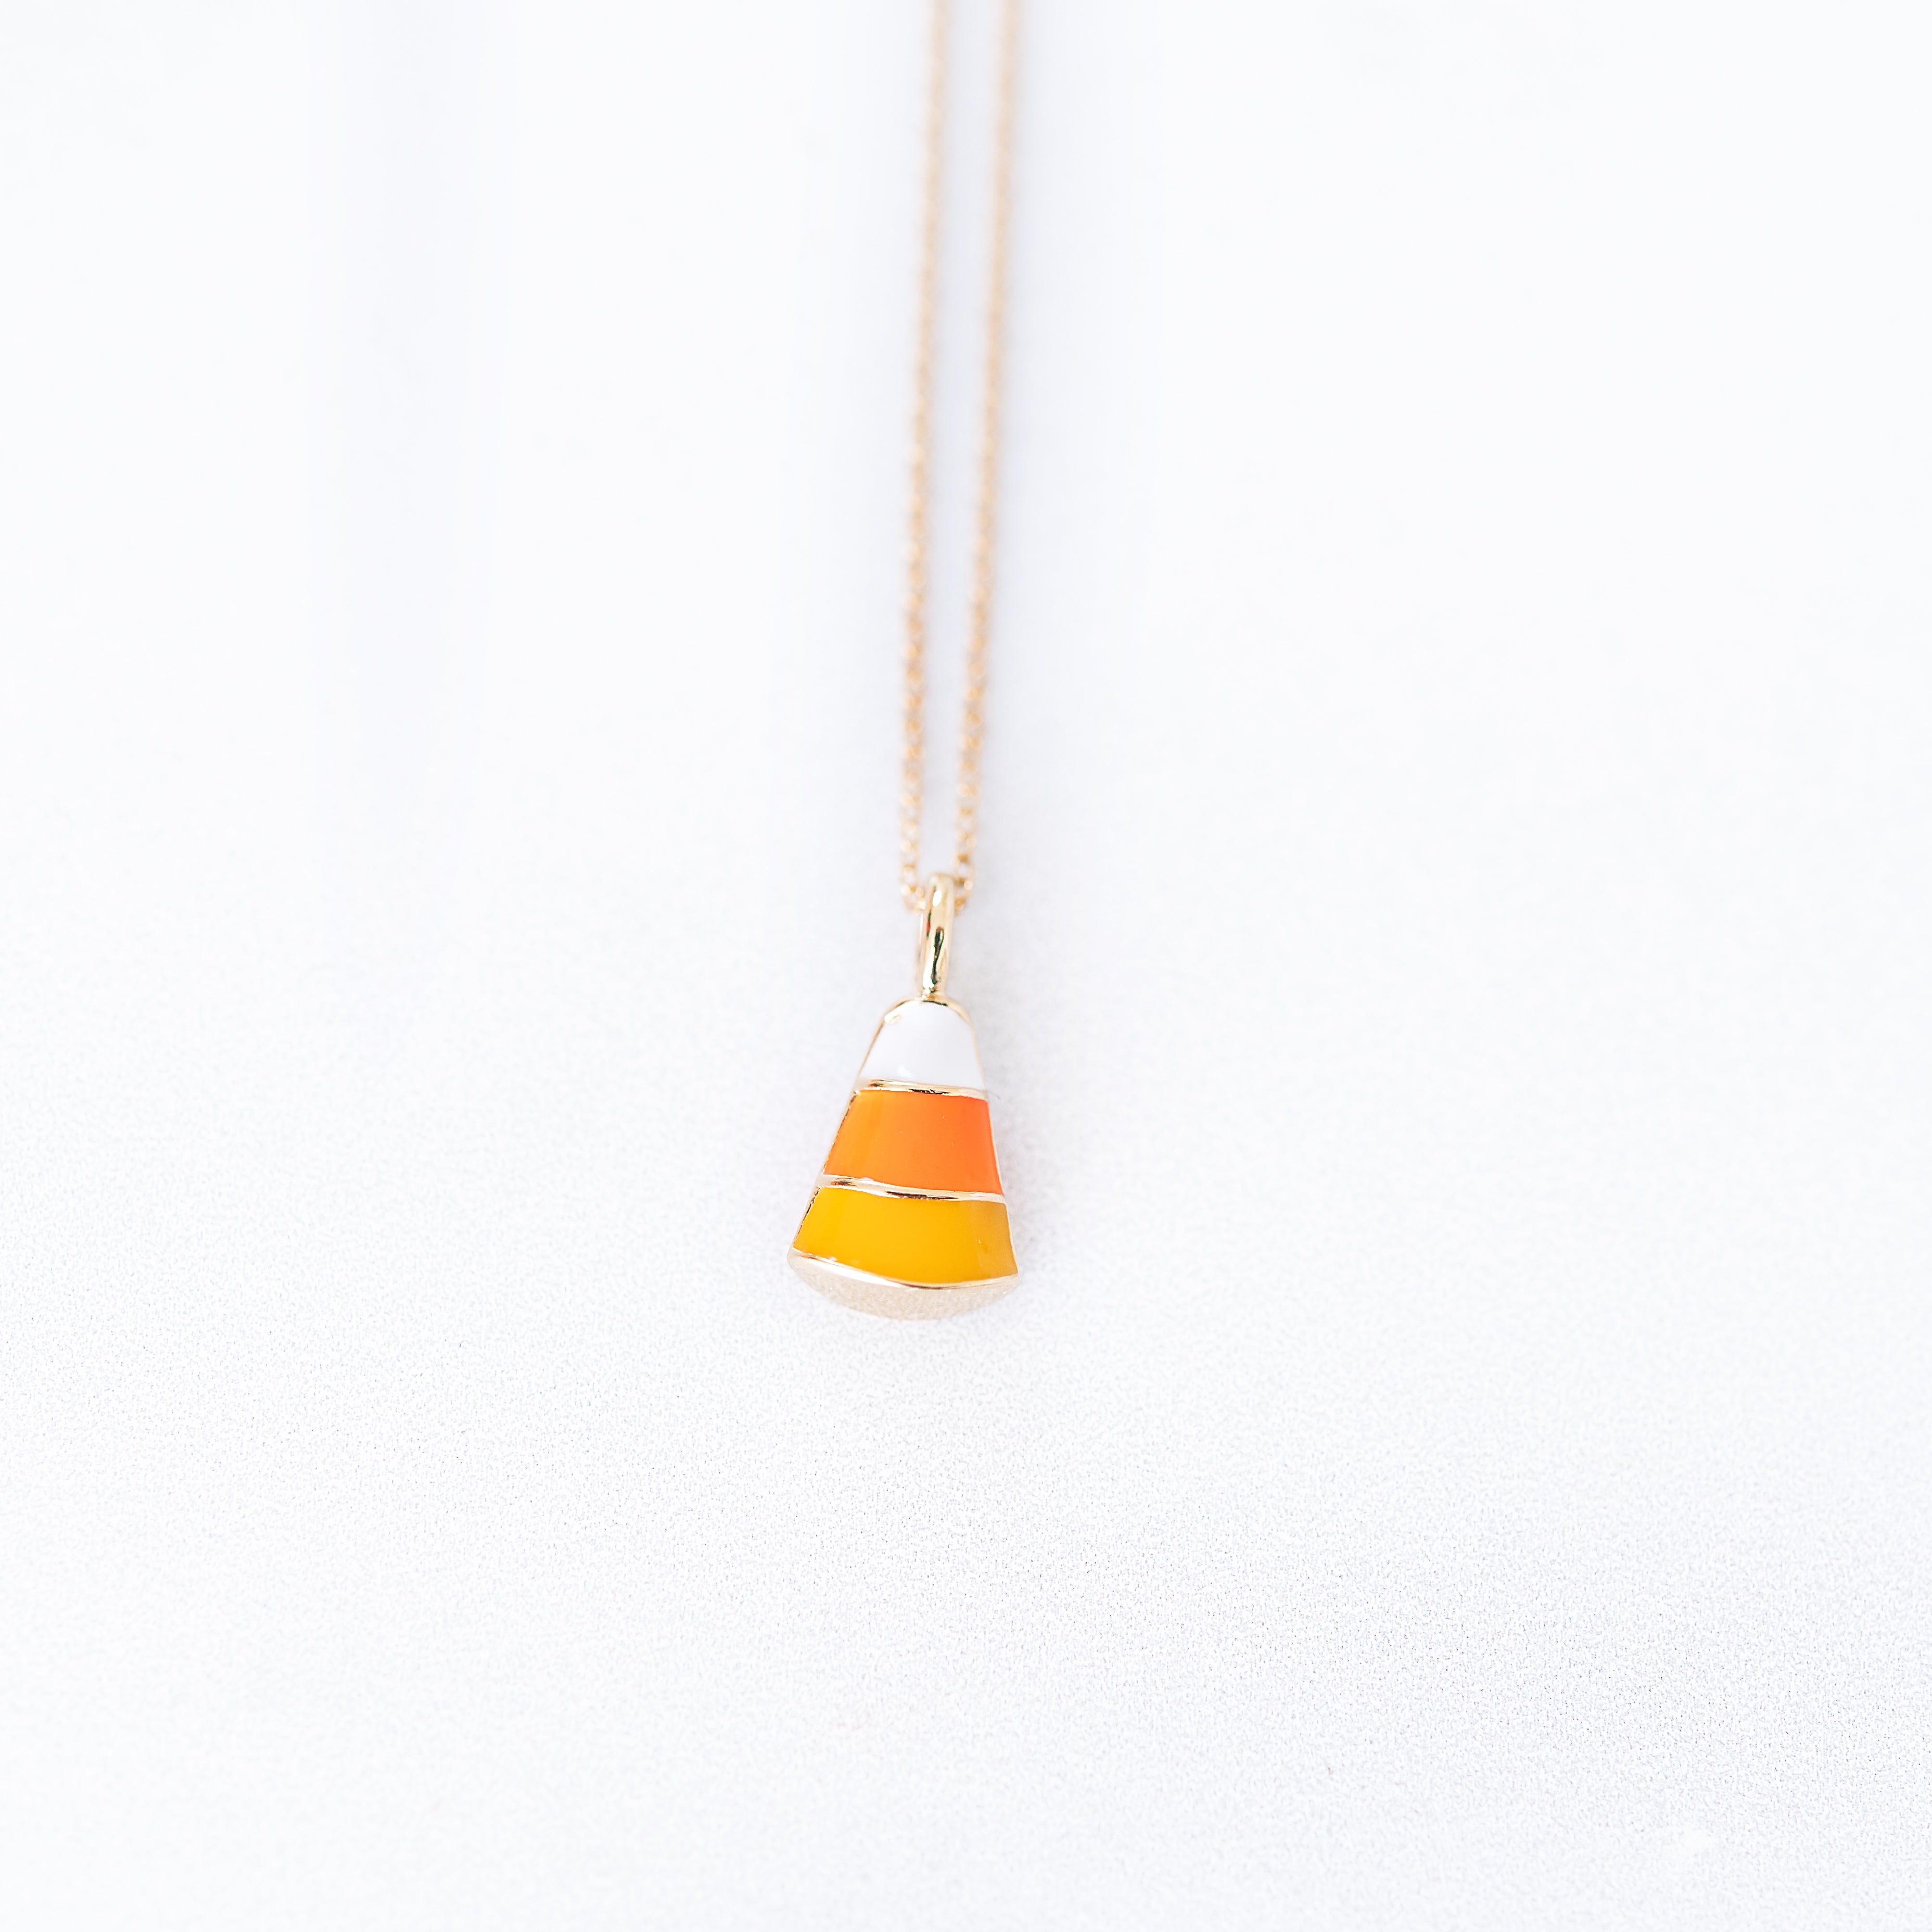 candy corn necklaces! | rachlj22 | Flickr